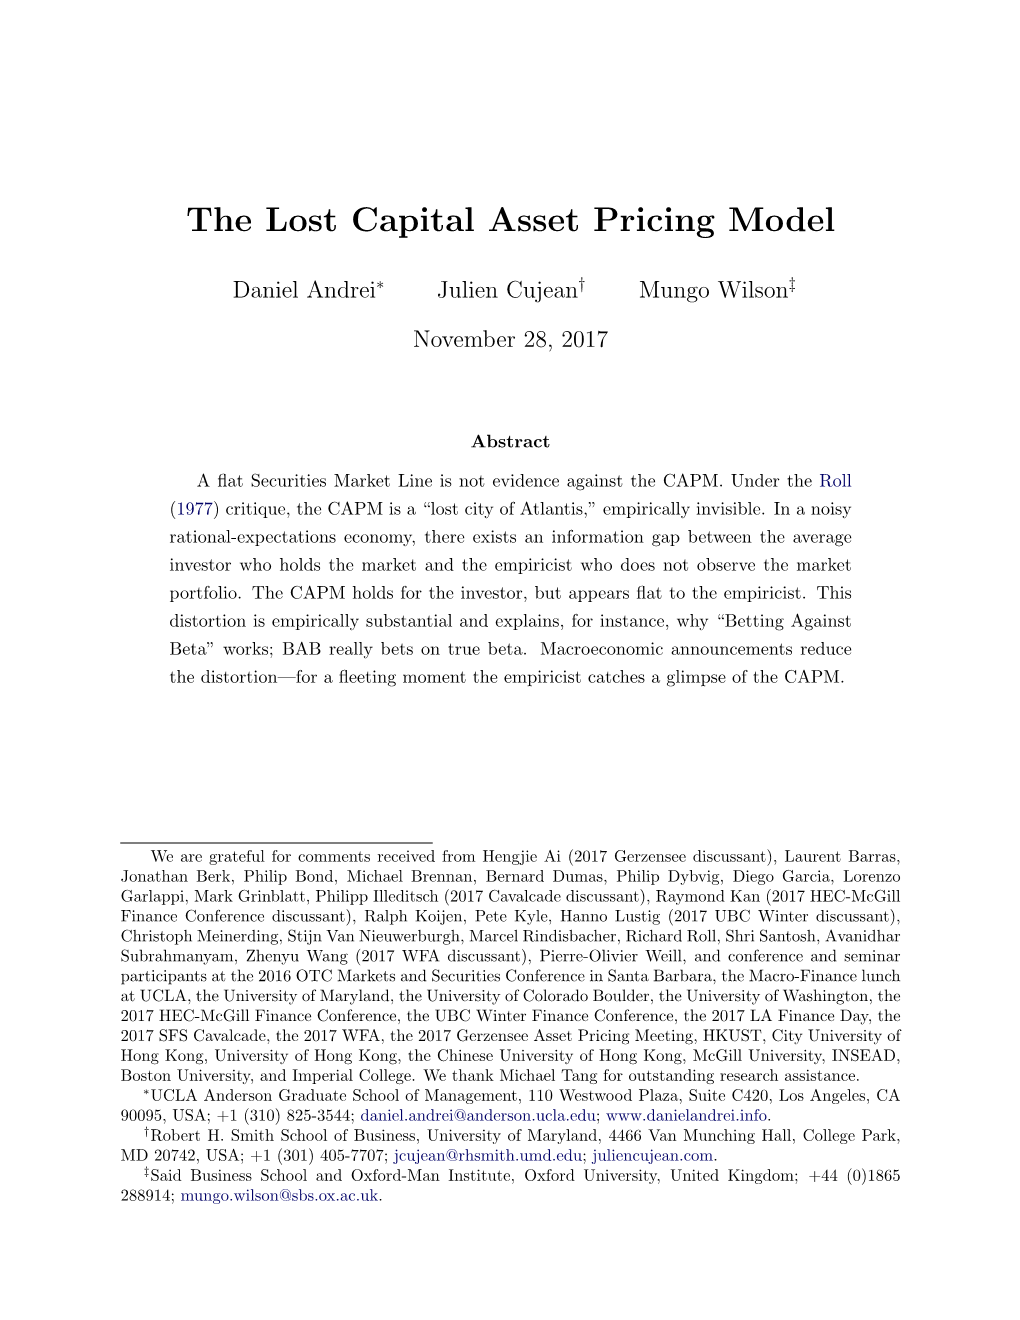 The Lost Capital Asset Pricing Model